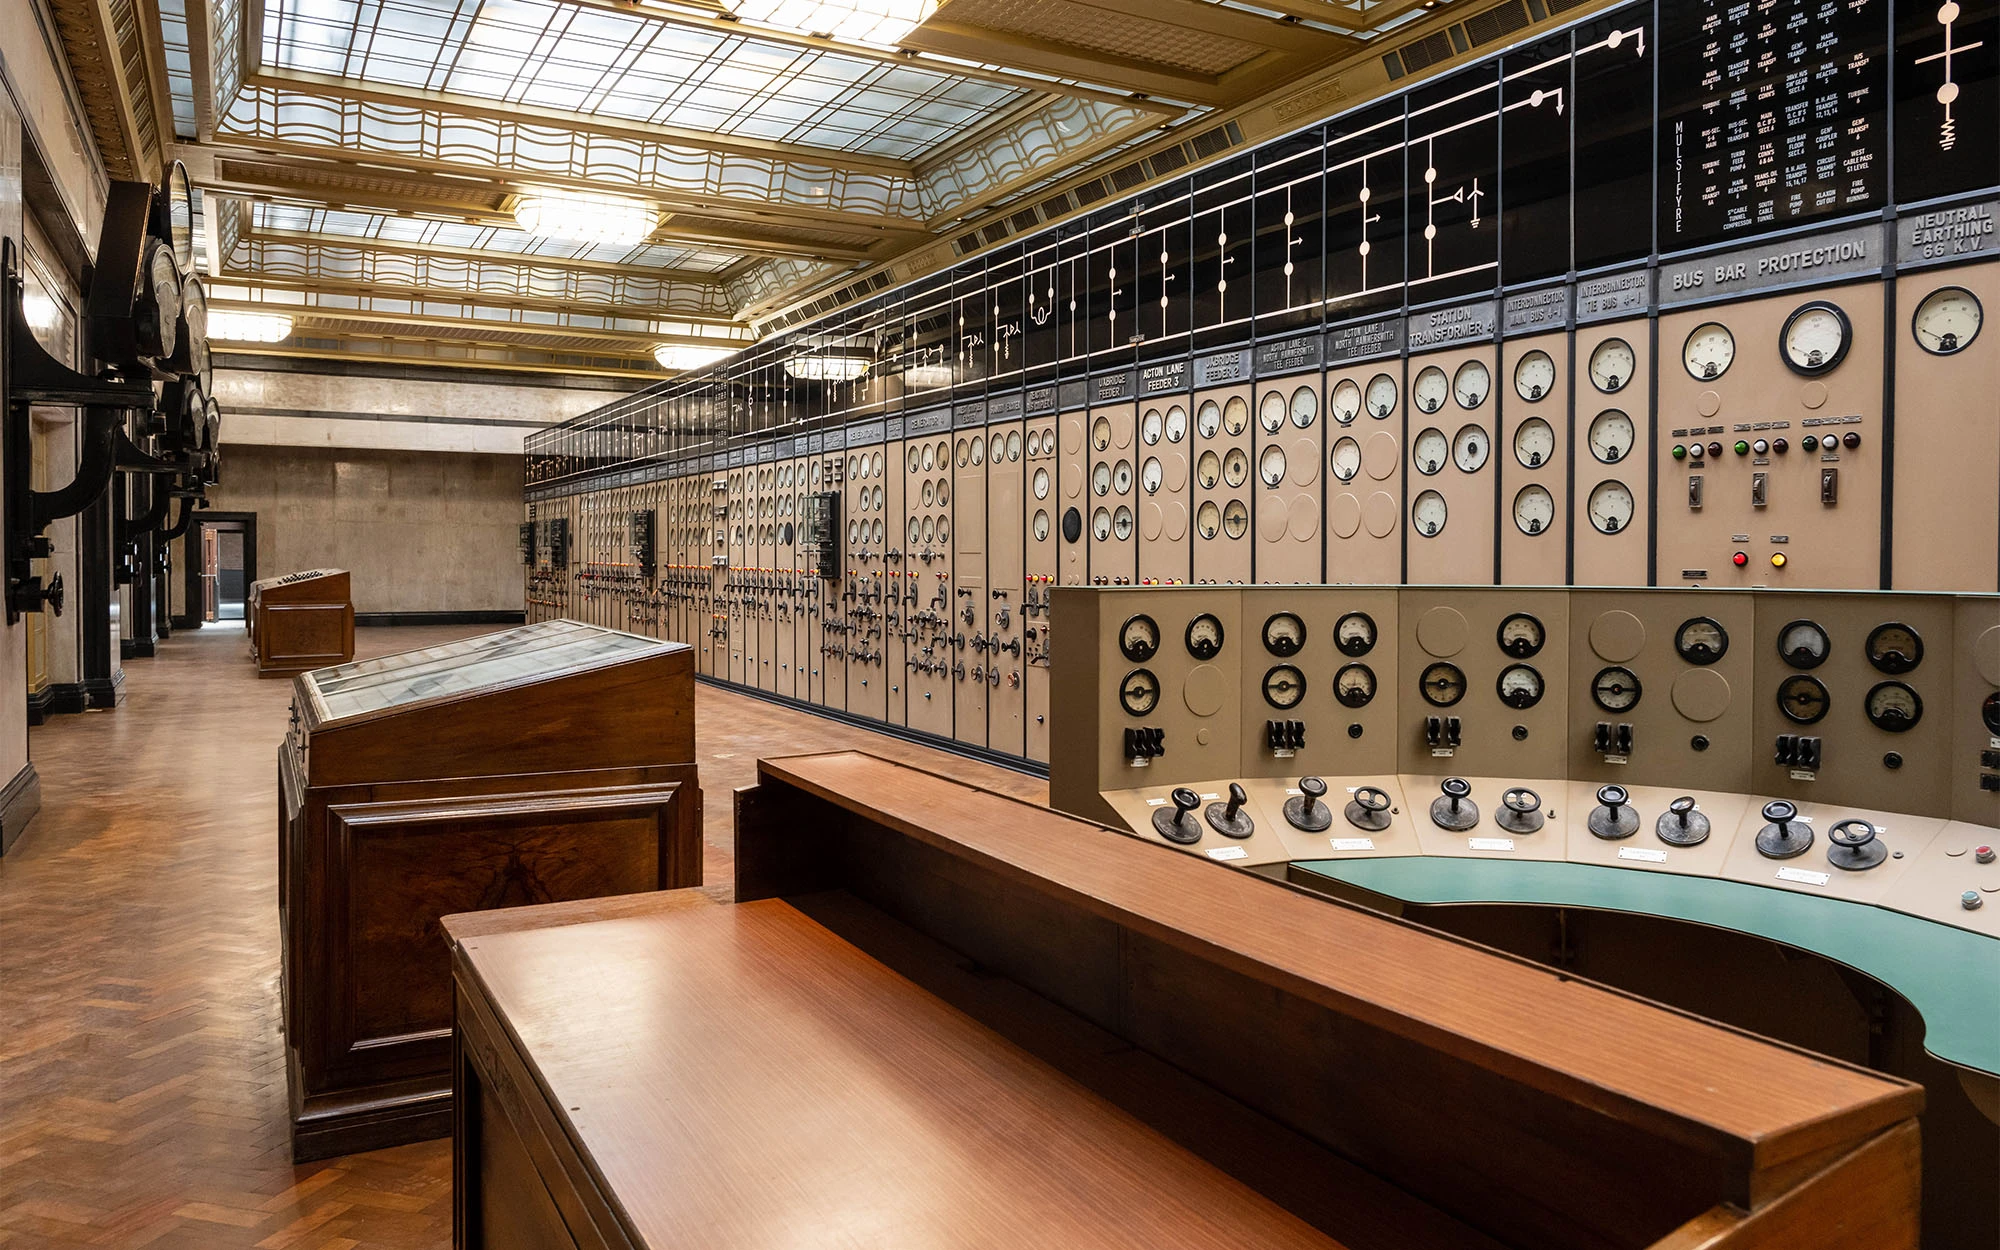 Control Room A at Battersea Power Station